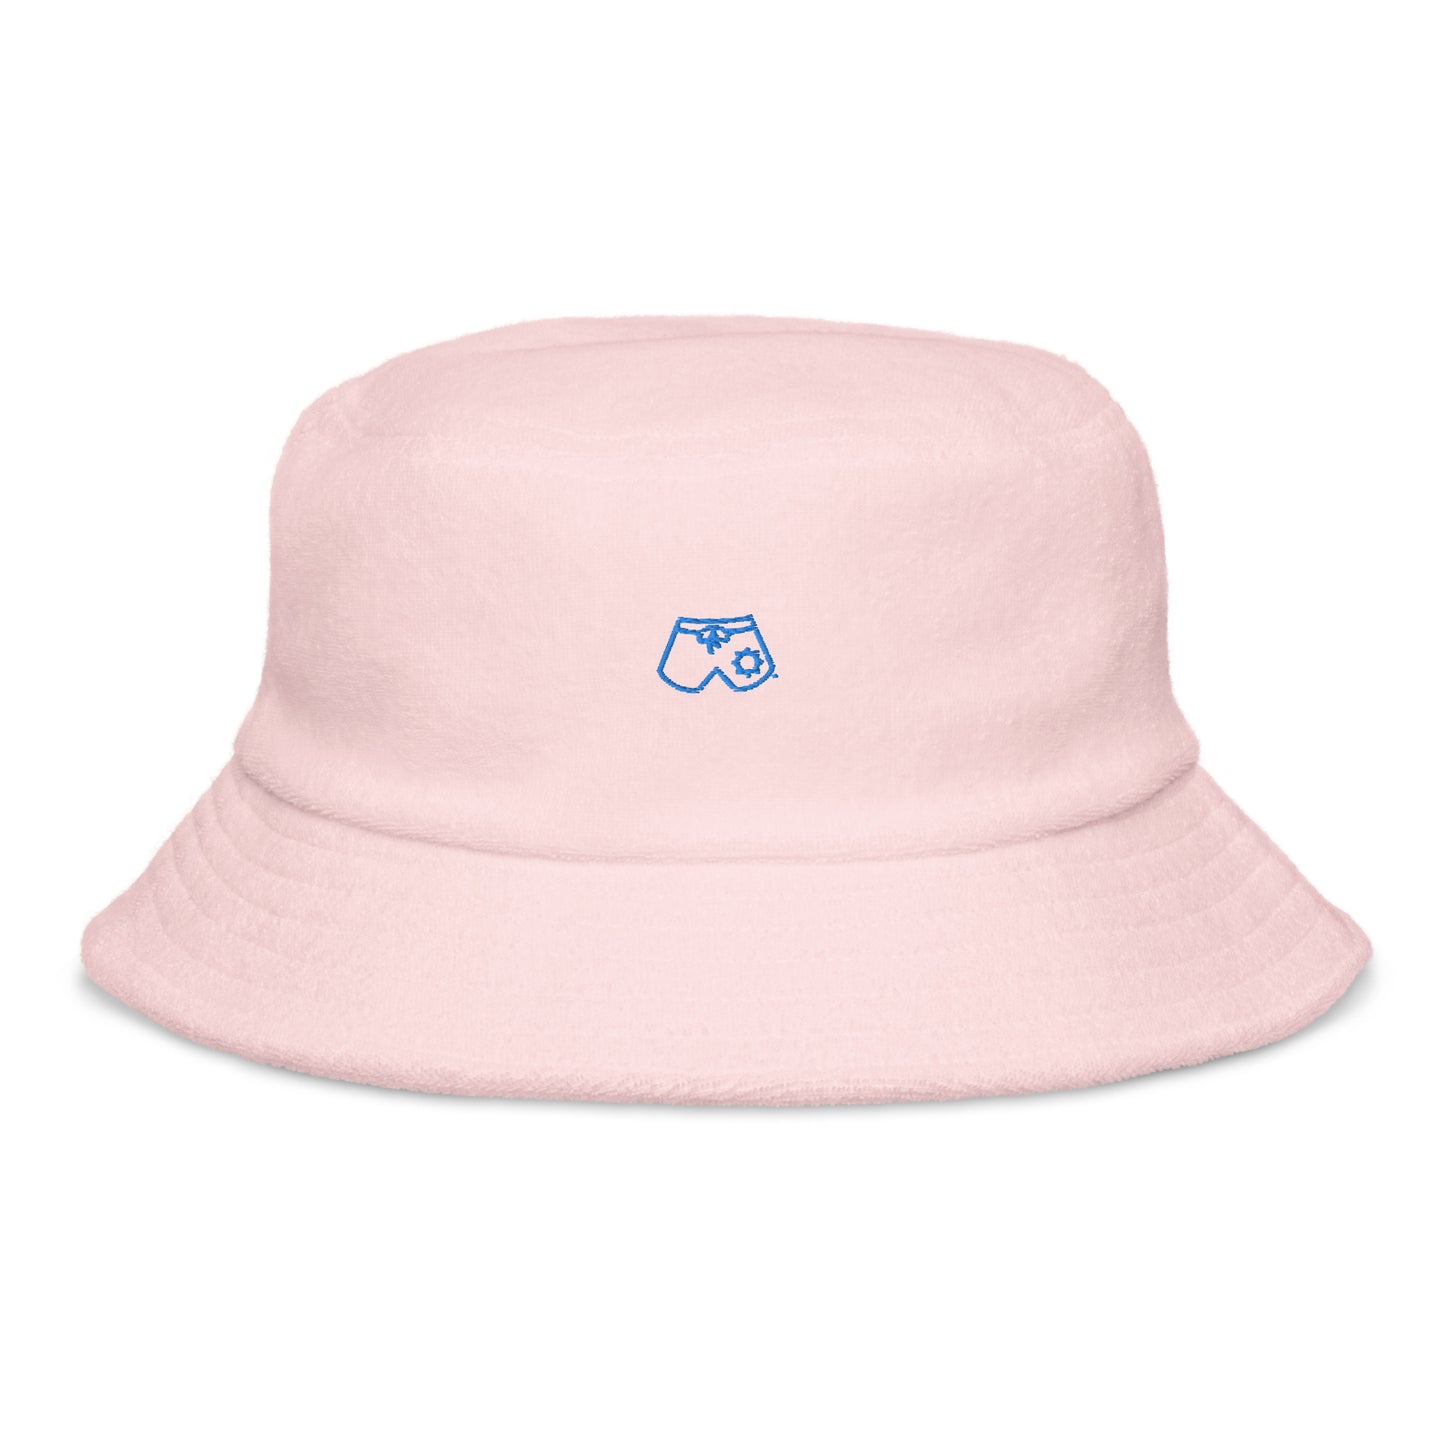 Cabana Boys Unstructured terry cloth bucket hat